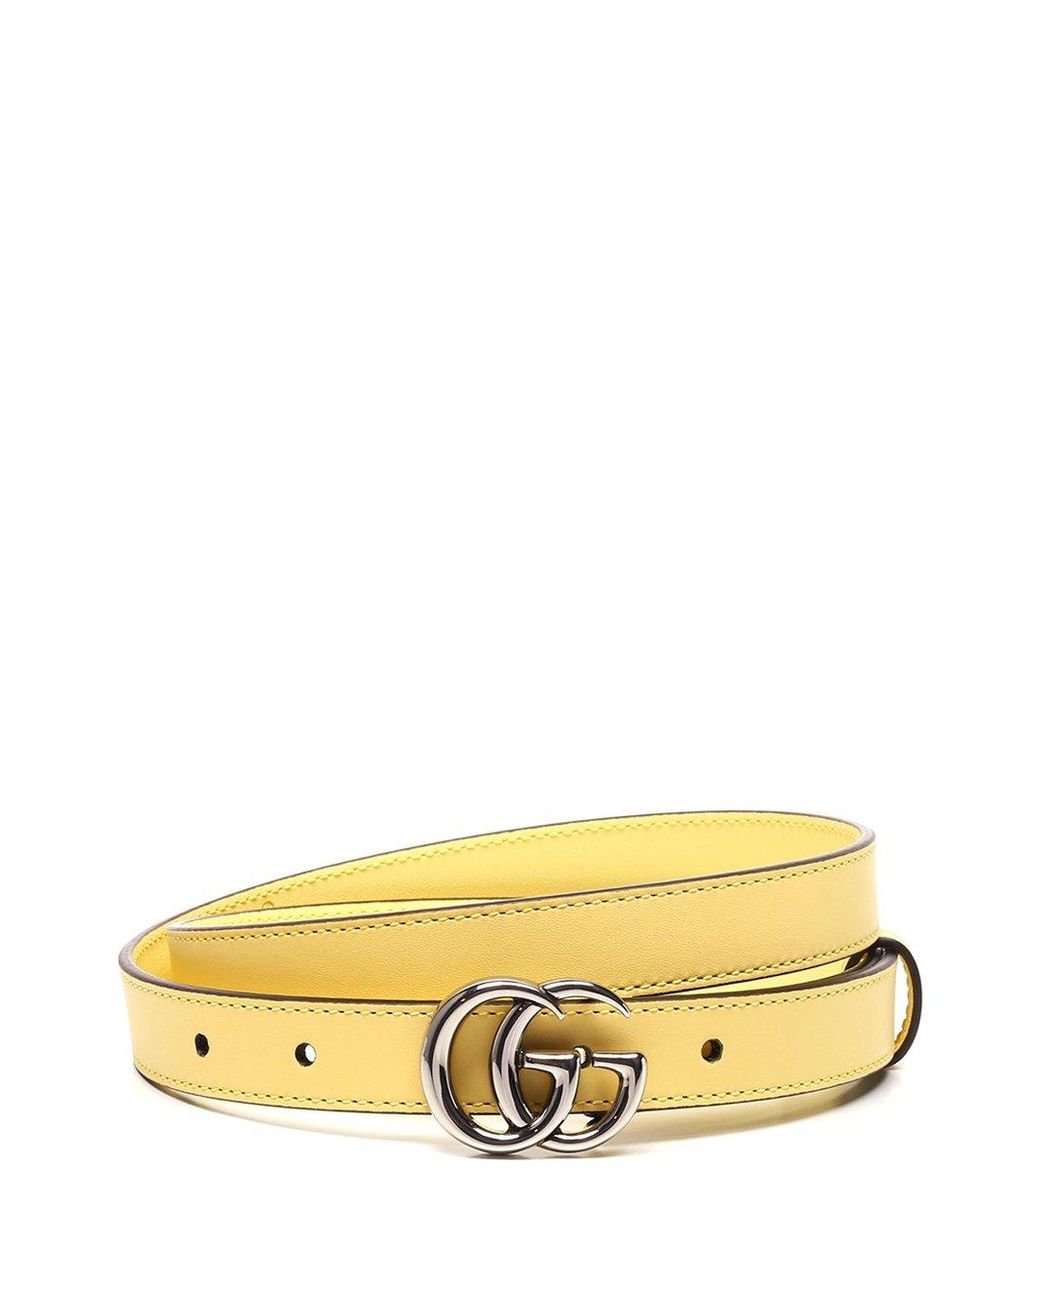 Gucci Thin Belt With Double G Buckle in Yellow | Lyst